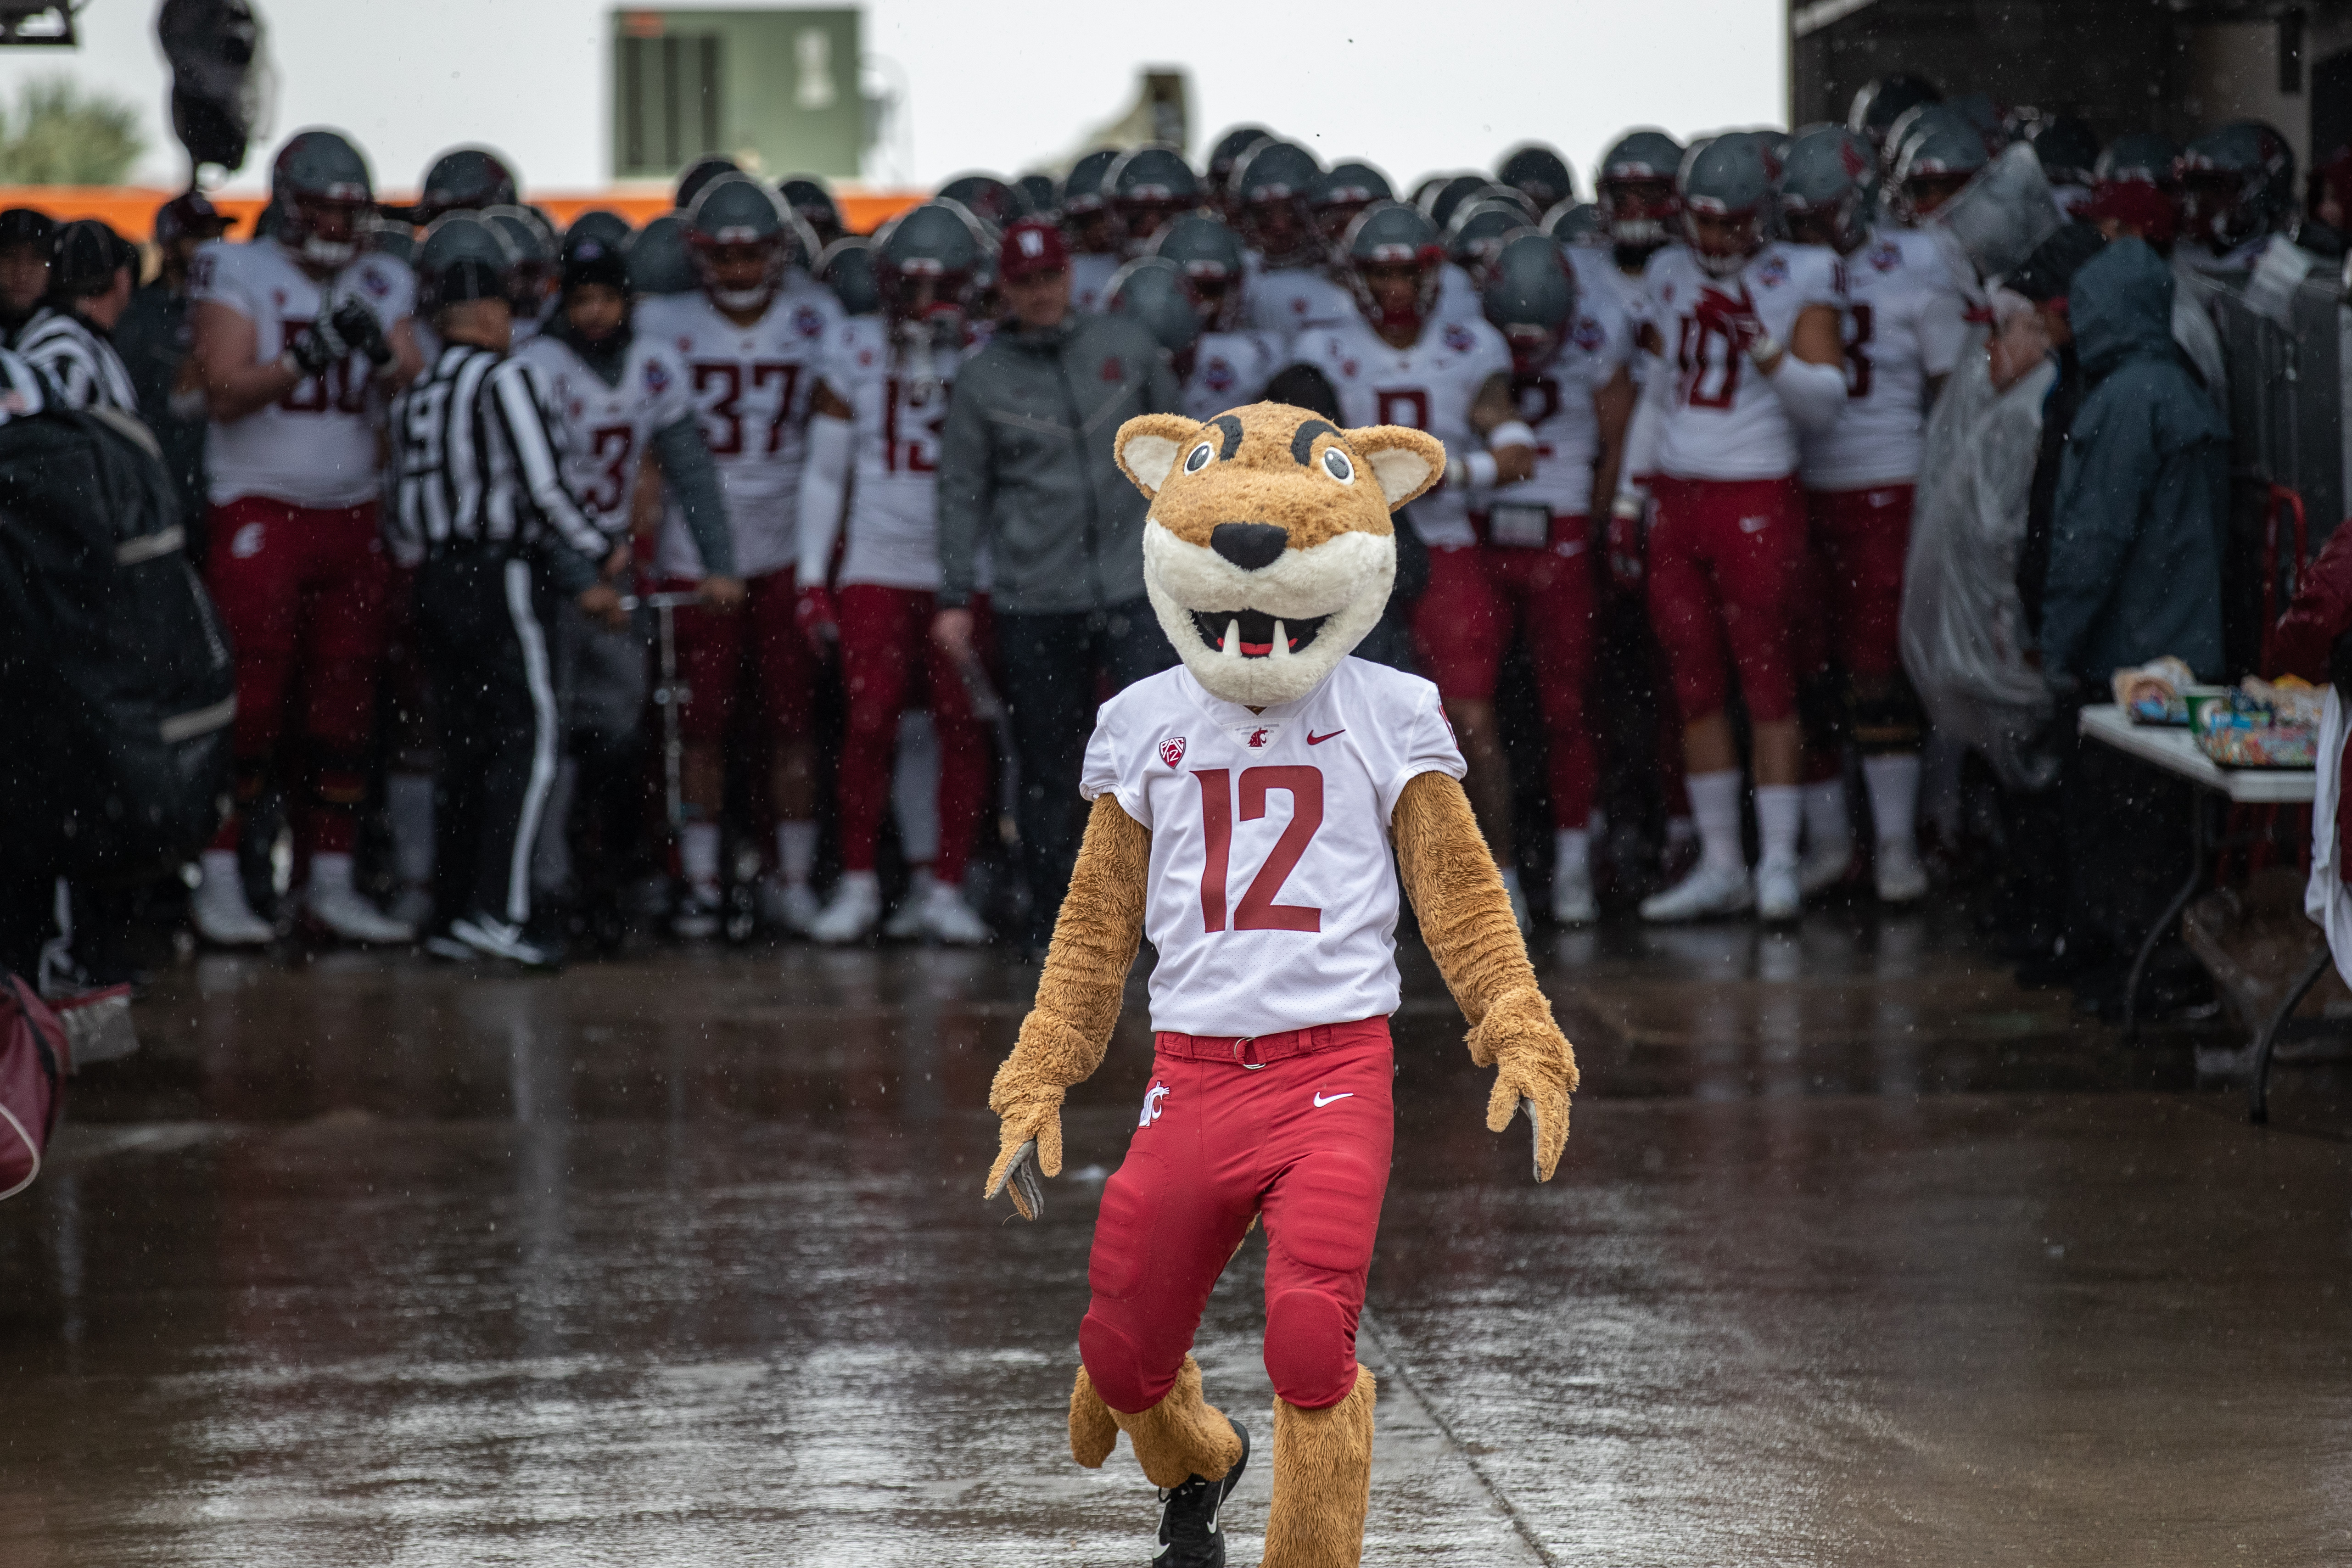 EL PASO, TX - DECEMBER 31: Washington State mascot Butch T Cougar stands in front of the team prior to the 2021 Tony the Tiger Sun Bowl matchup between the Central Michigan Chippewas and the Washington State Cougars on New Year’s Eve at Sun Bowl Stadium in El Paso, TX.